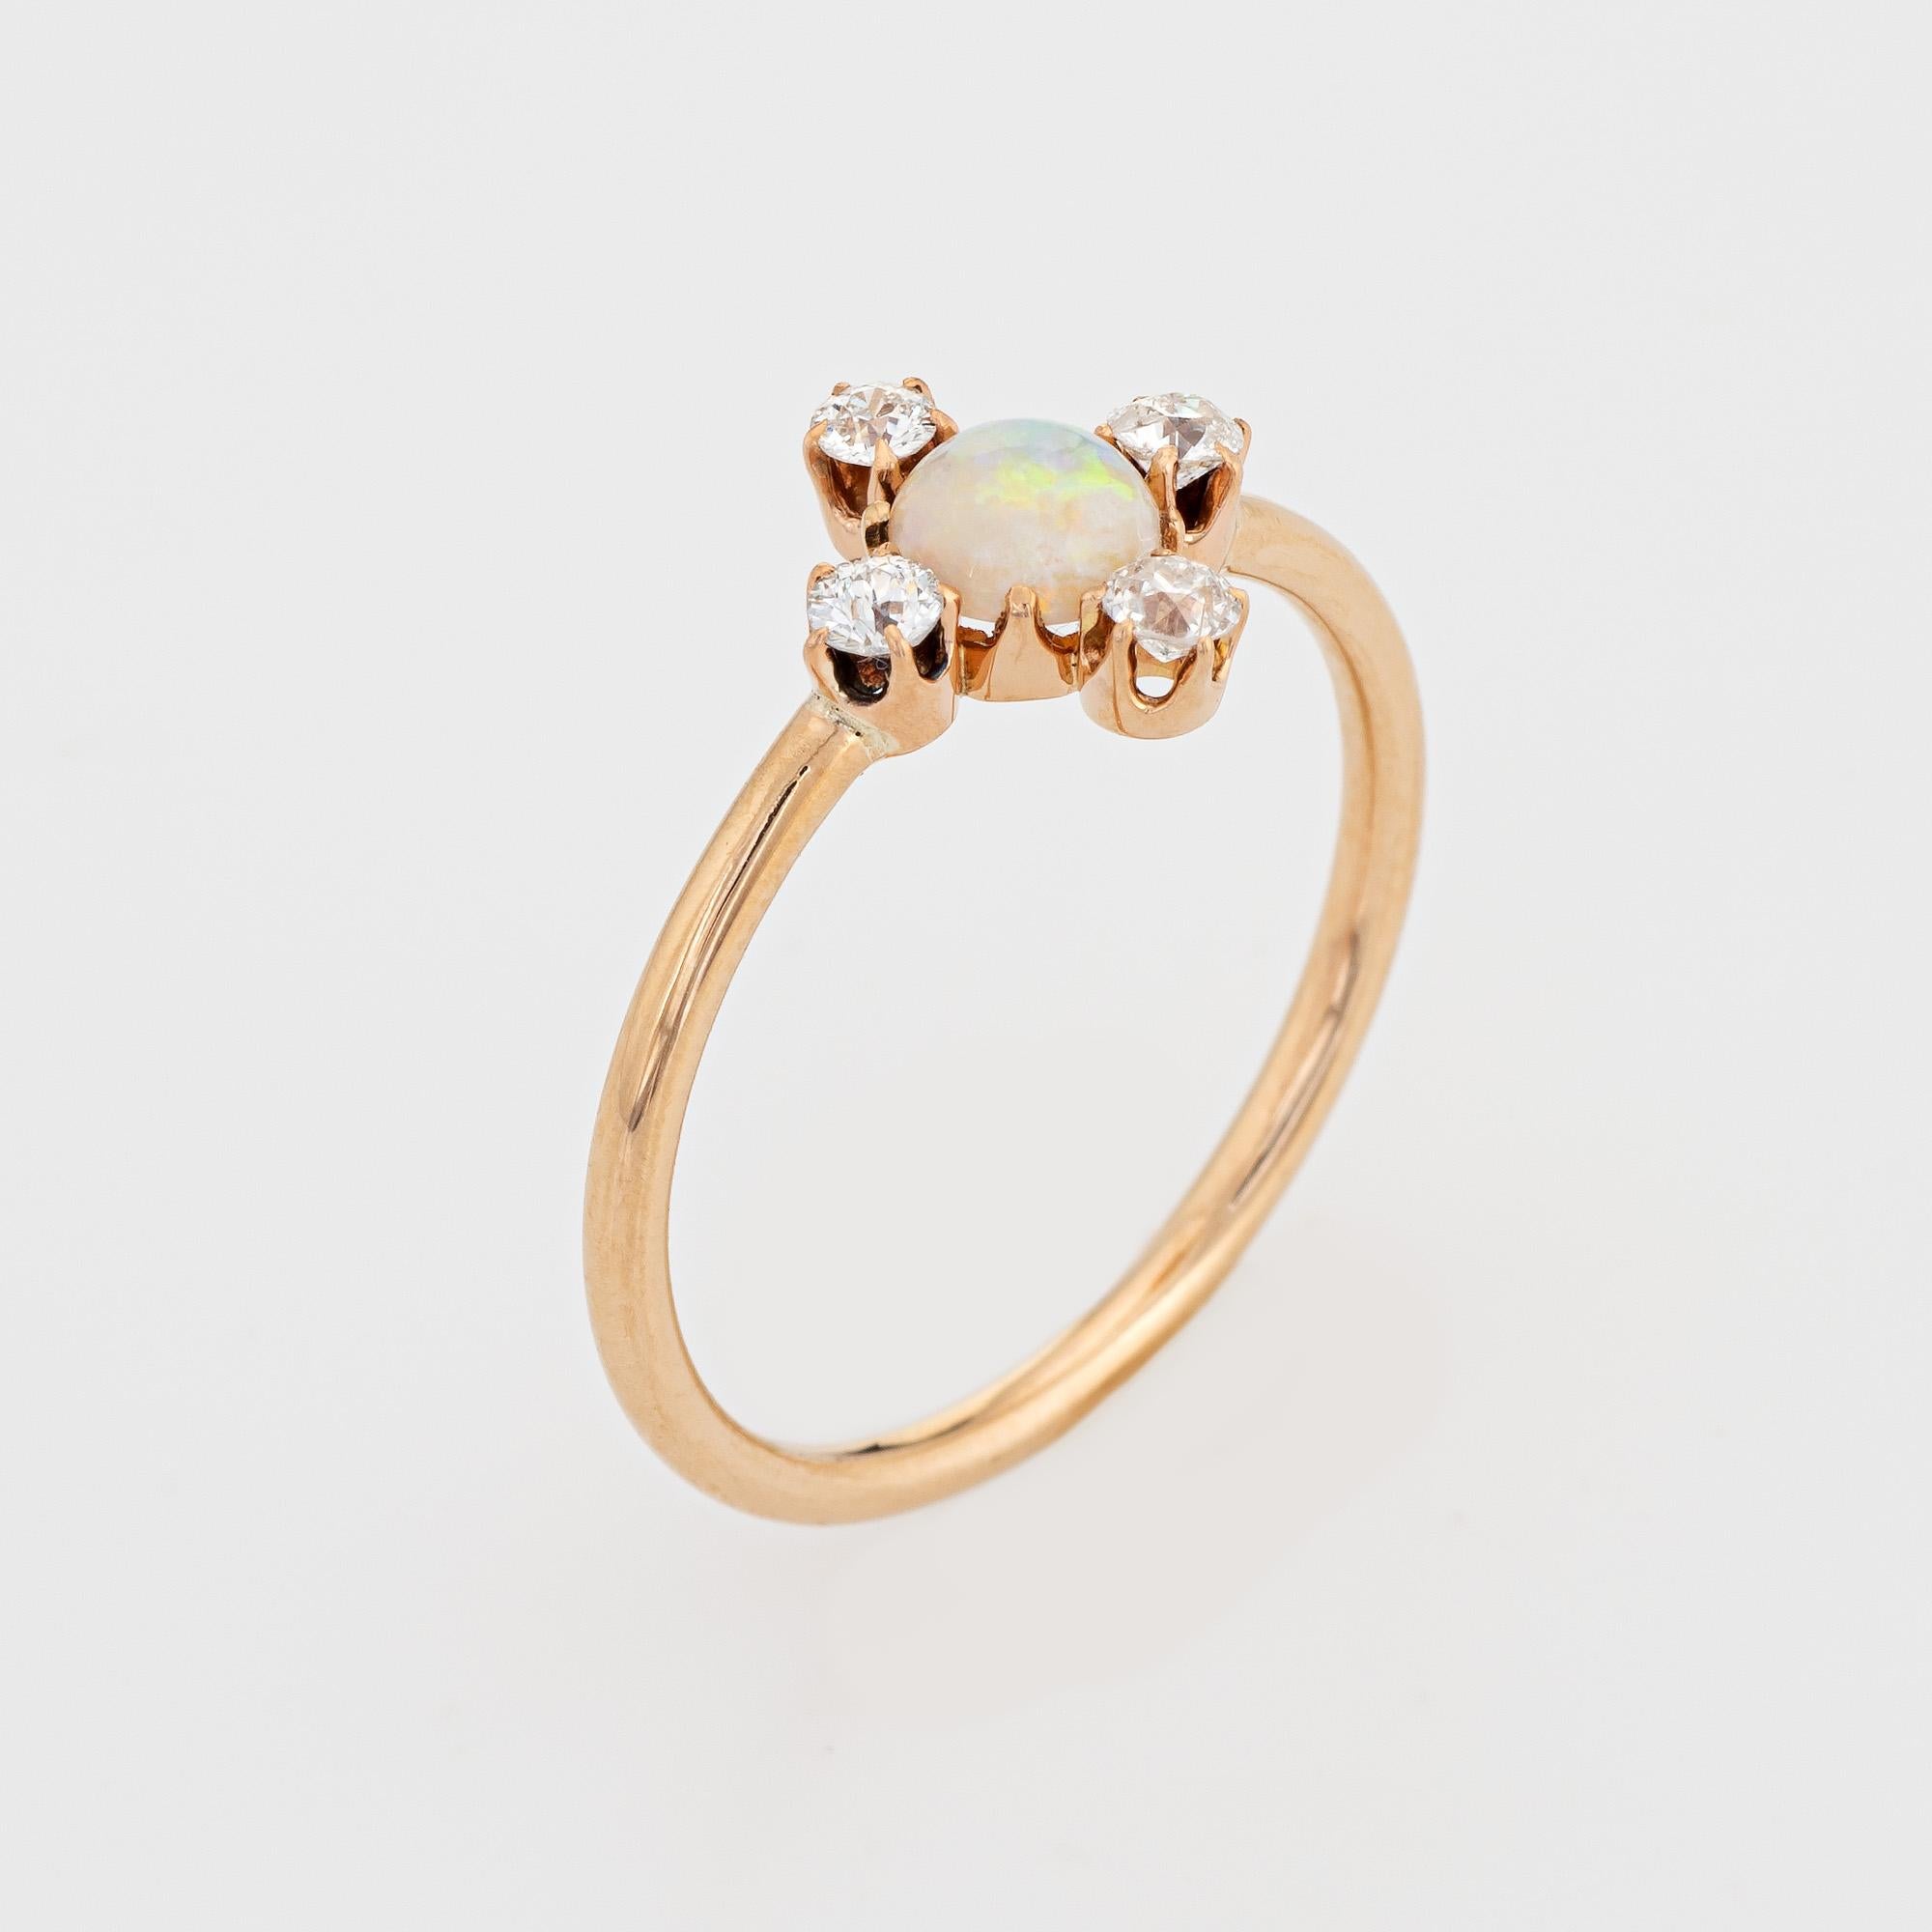 Originally an antique Victorian era stick pin (circa 1880s to 1900s), the opal & diamond ring is crafted in 14 karat yellow gold.

The ring is mounted with the original stick pin. Our jeweler rounded the stick pin into a slim band for the finger.